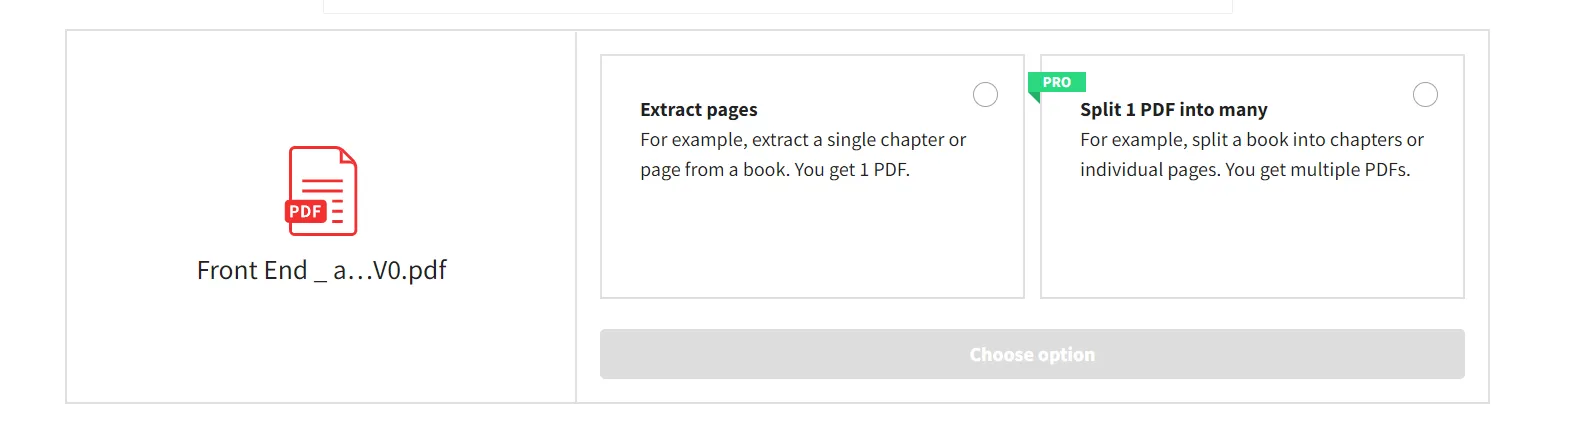 How to Separate PDF Pages, Figure 11: Split and extract page features in Smallpdf